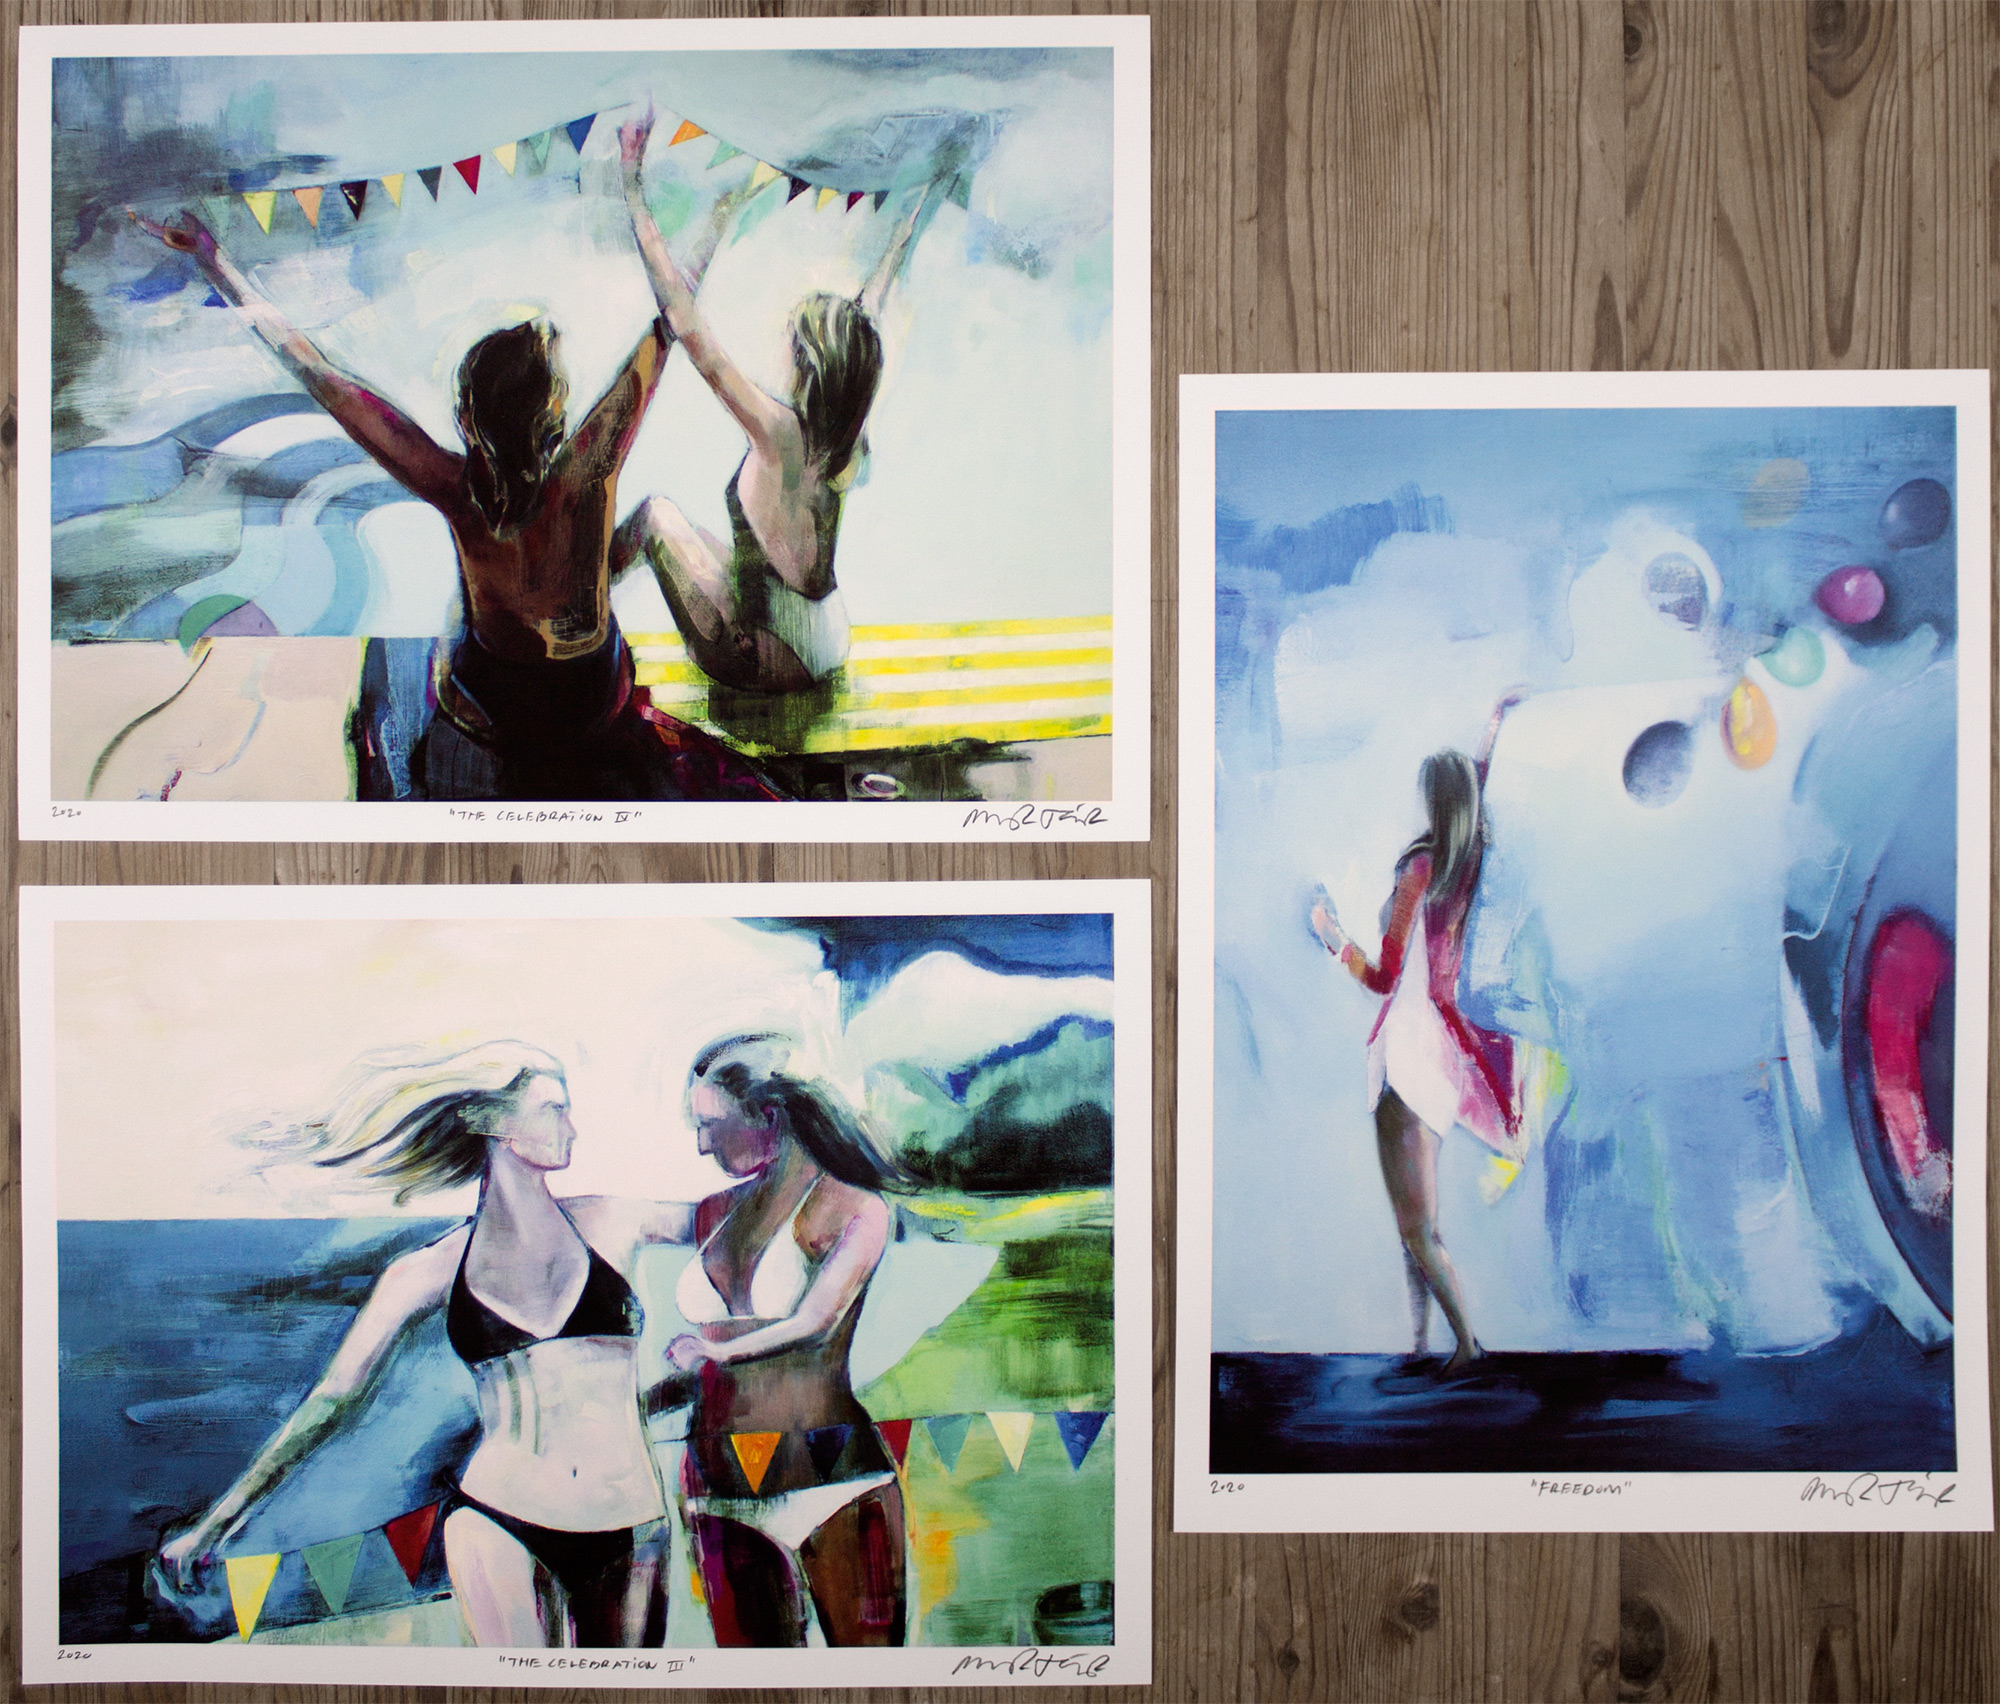 posters-prints, giclee-print, aesthetic, colorful, figurative, graphical, bodies, nature, oceans, people, beige, blue, turquoise, yellow, ink, paper, beach, beautiful, contemporary-art, copenhagen, danish, decorative, design, female, interior, interior-design, modern, modern-art, nordic, posters, romantic, scandinavien, summer, women, Buy original high quality art. Paintings, drawings, limited edition prints & posters by talented artists.